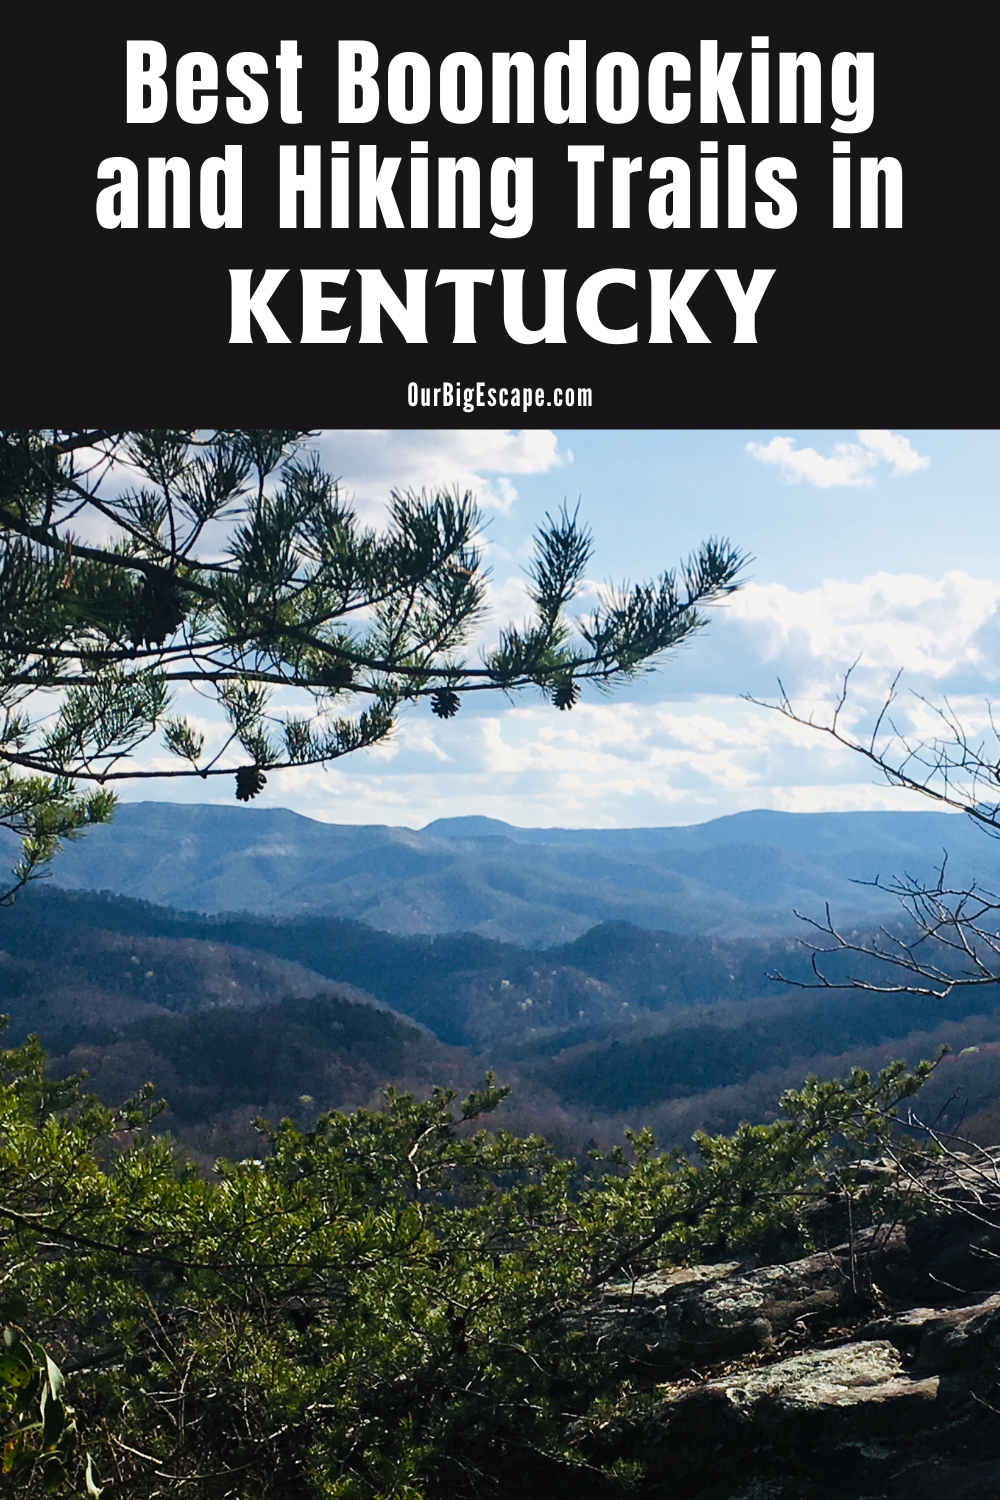 Best Boondocking and Hiking Trails in Kentucky